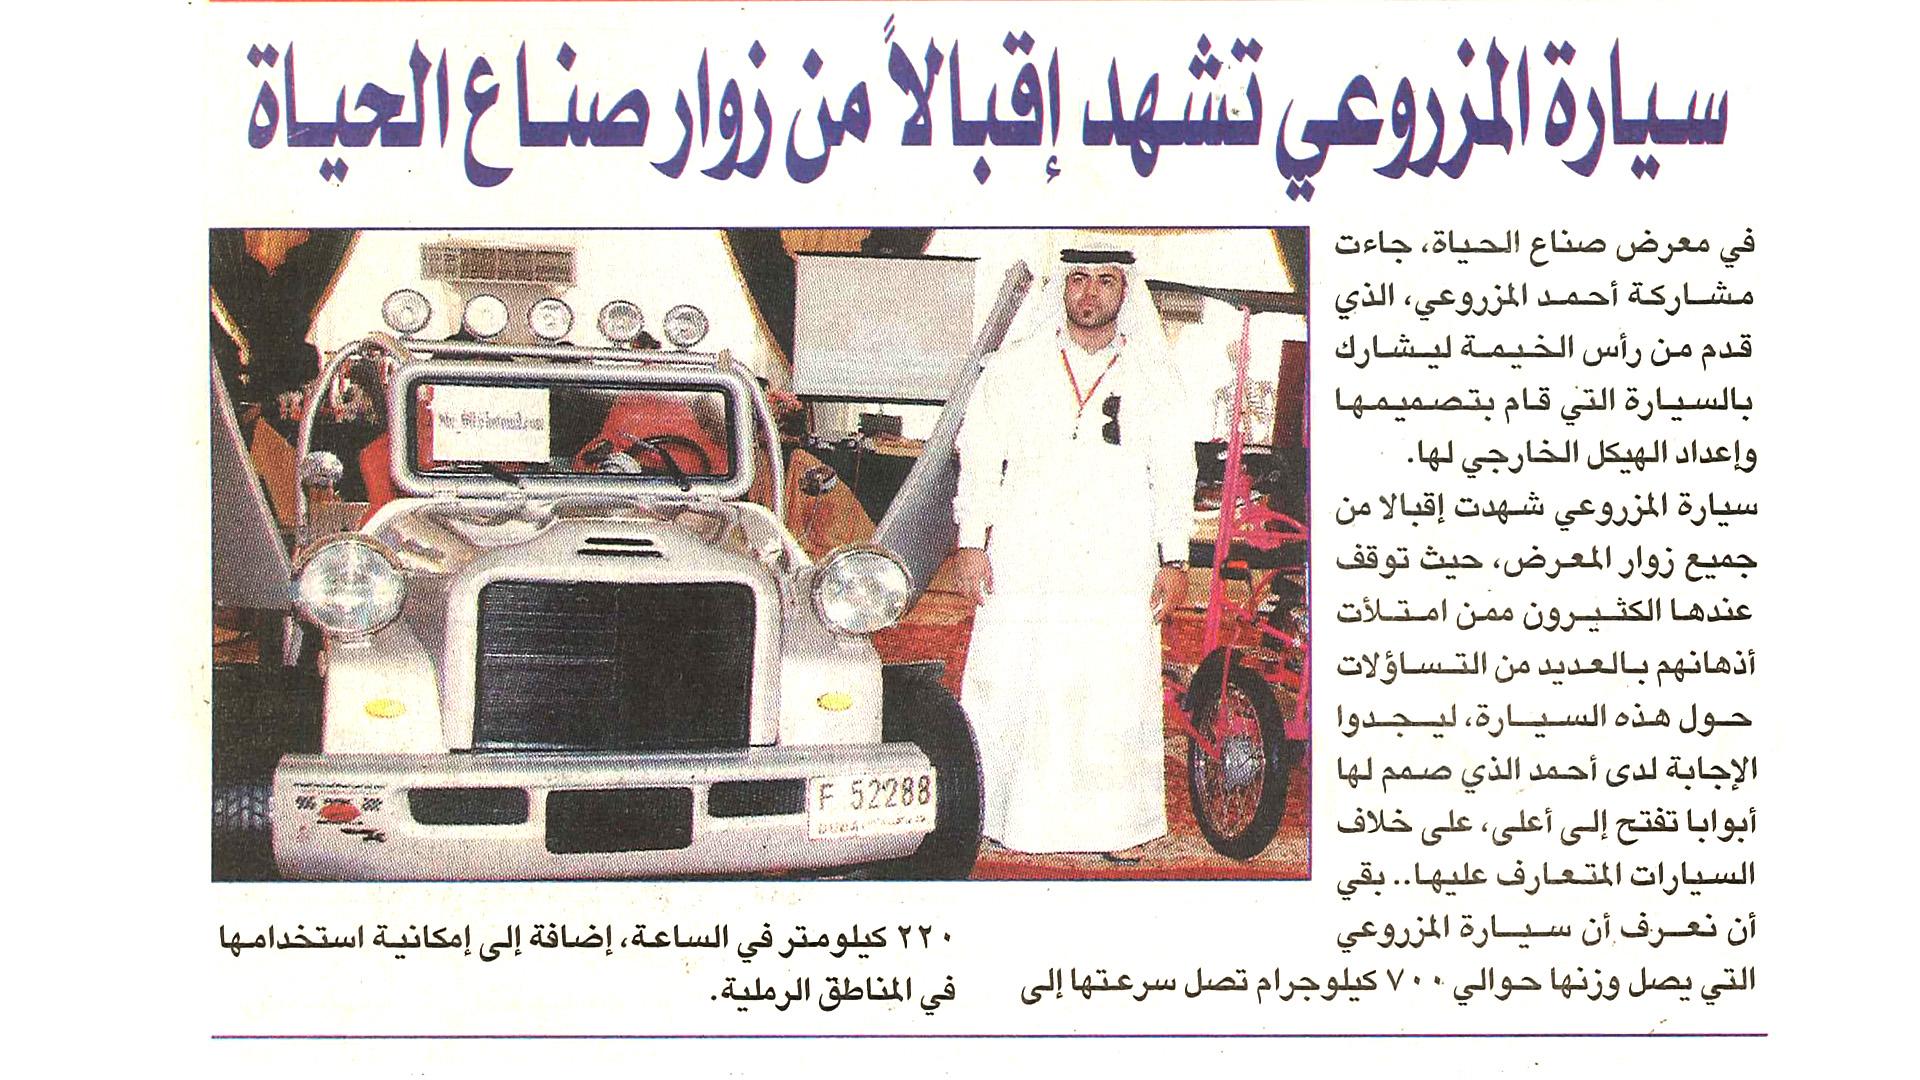 Made in UAE exhibition